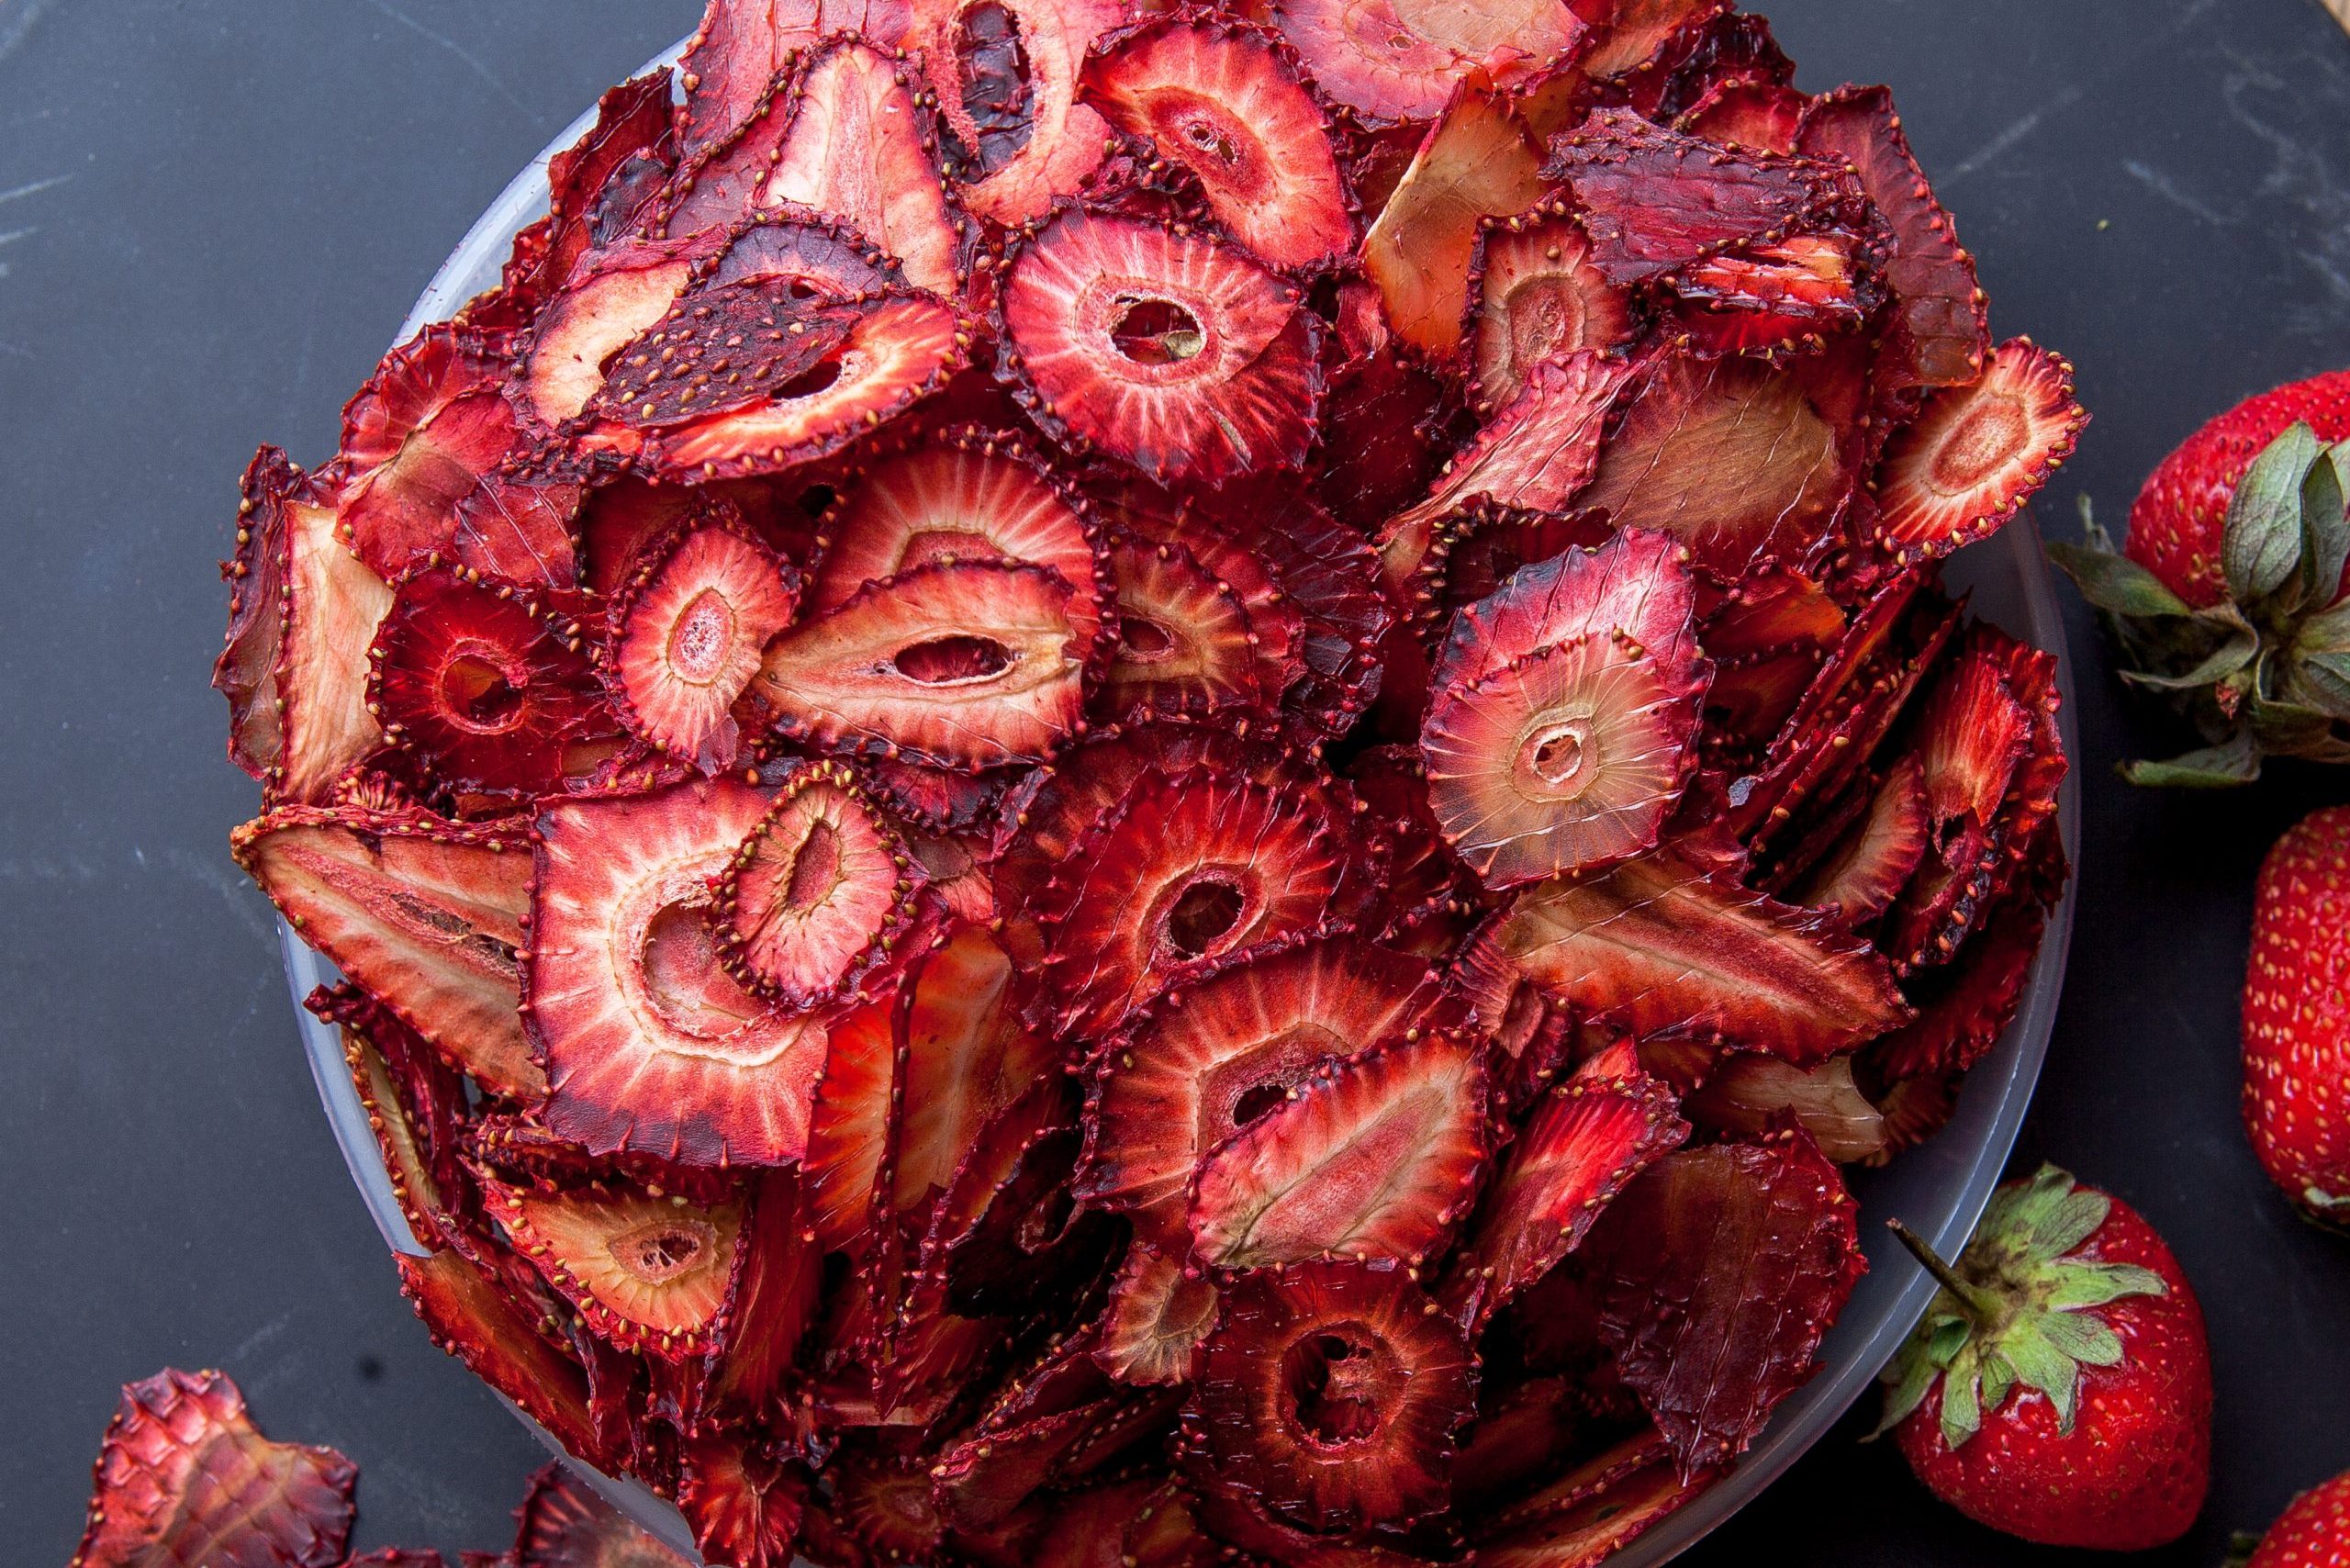 Top view dried strawberry in plate on round tray